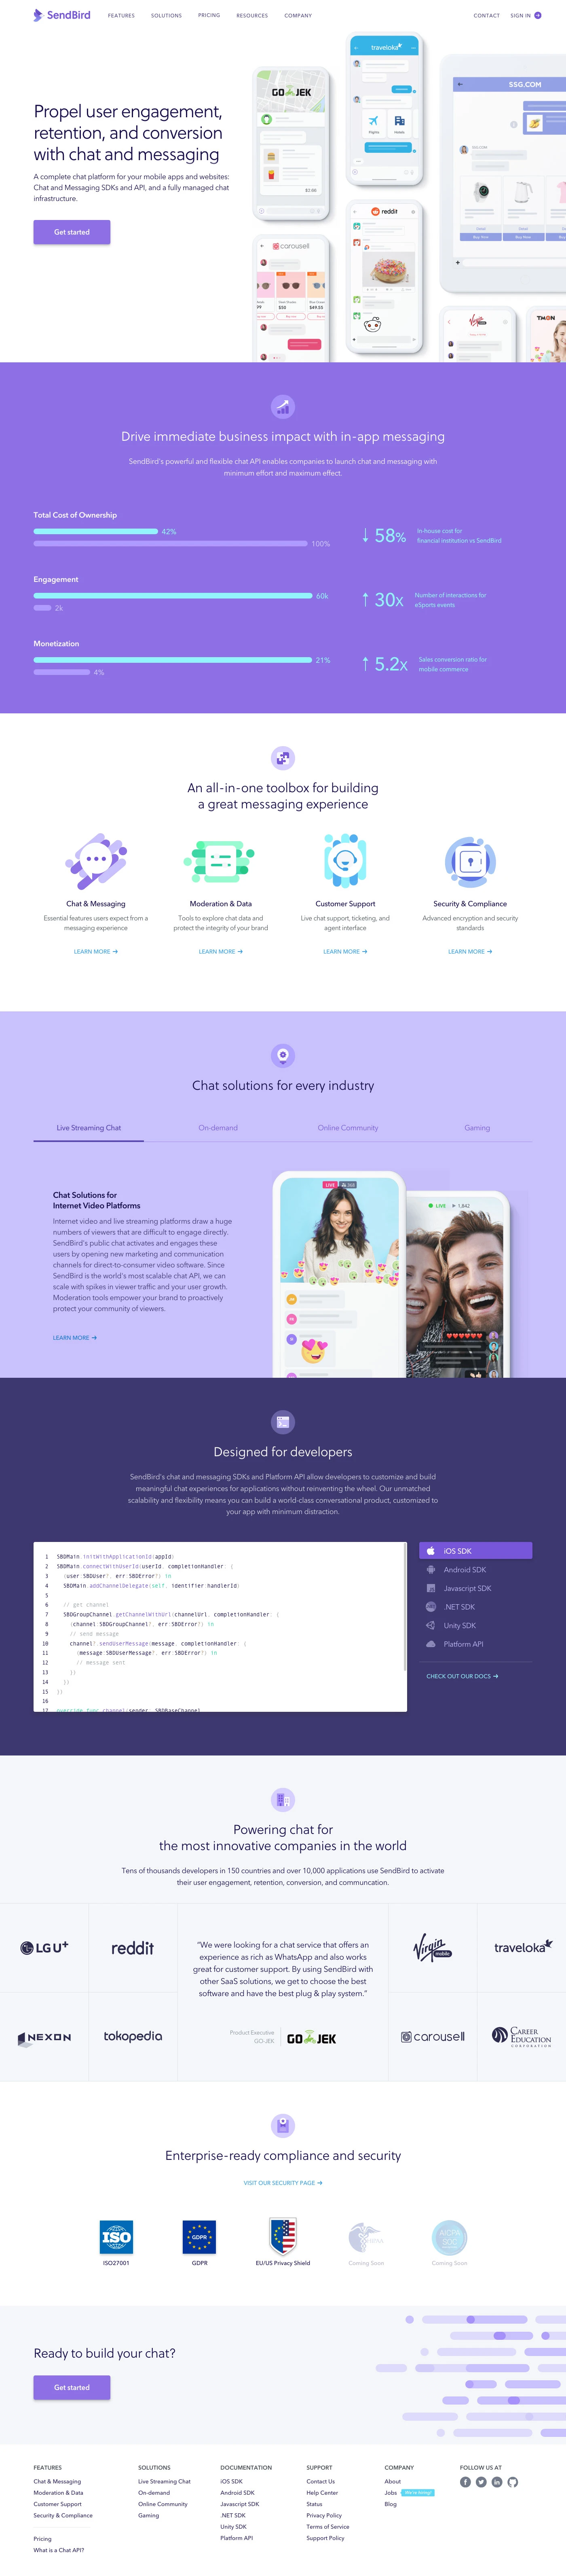 SendBird Landing Page Example: A complete chat platform for your mobile apps and websites: Chat and Messaging SDKs and API, and a fully managed chat infrastructure.